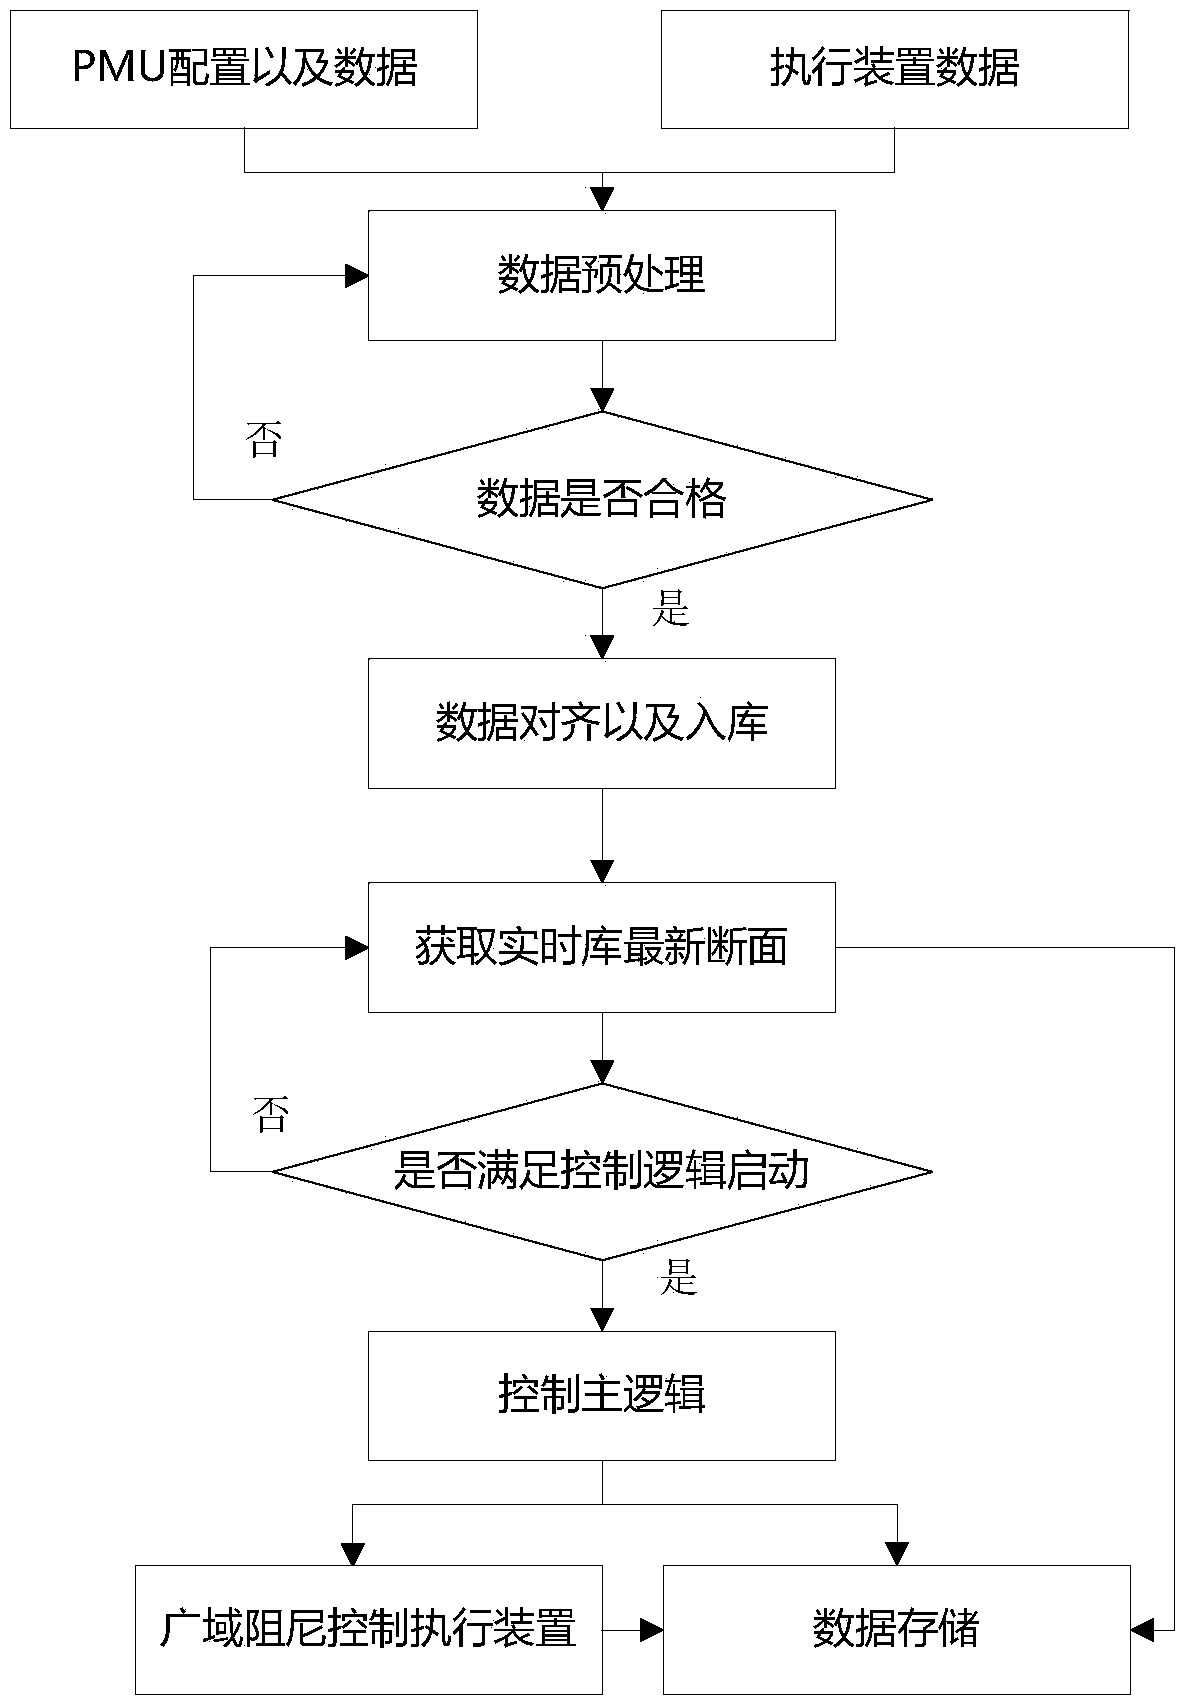 Wide area damping control real-time data processing method